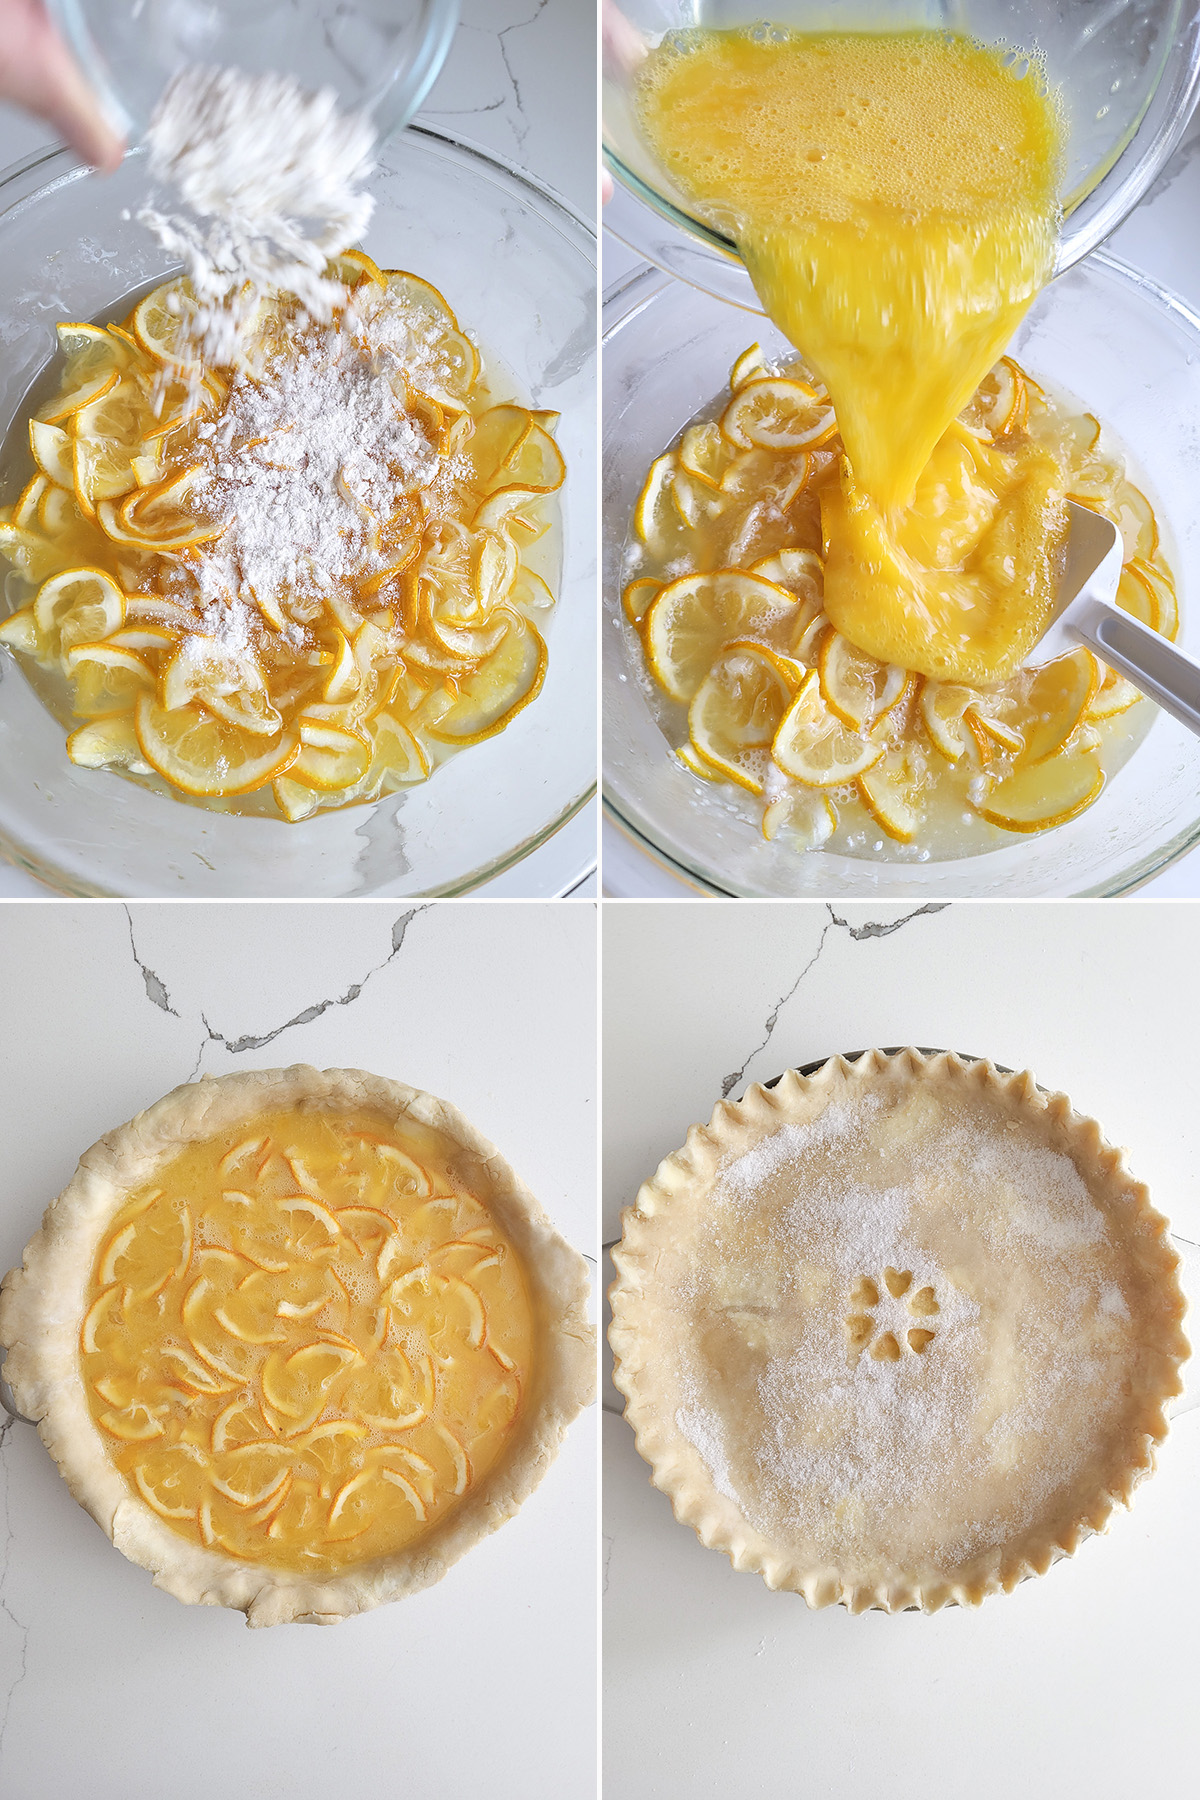 lemon slices in a bowl with flour and eggs. A pie shell filled with lemons.